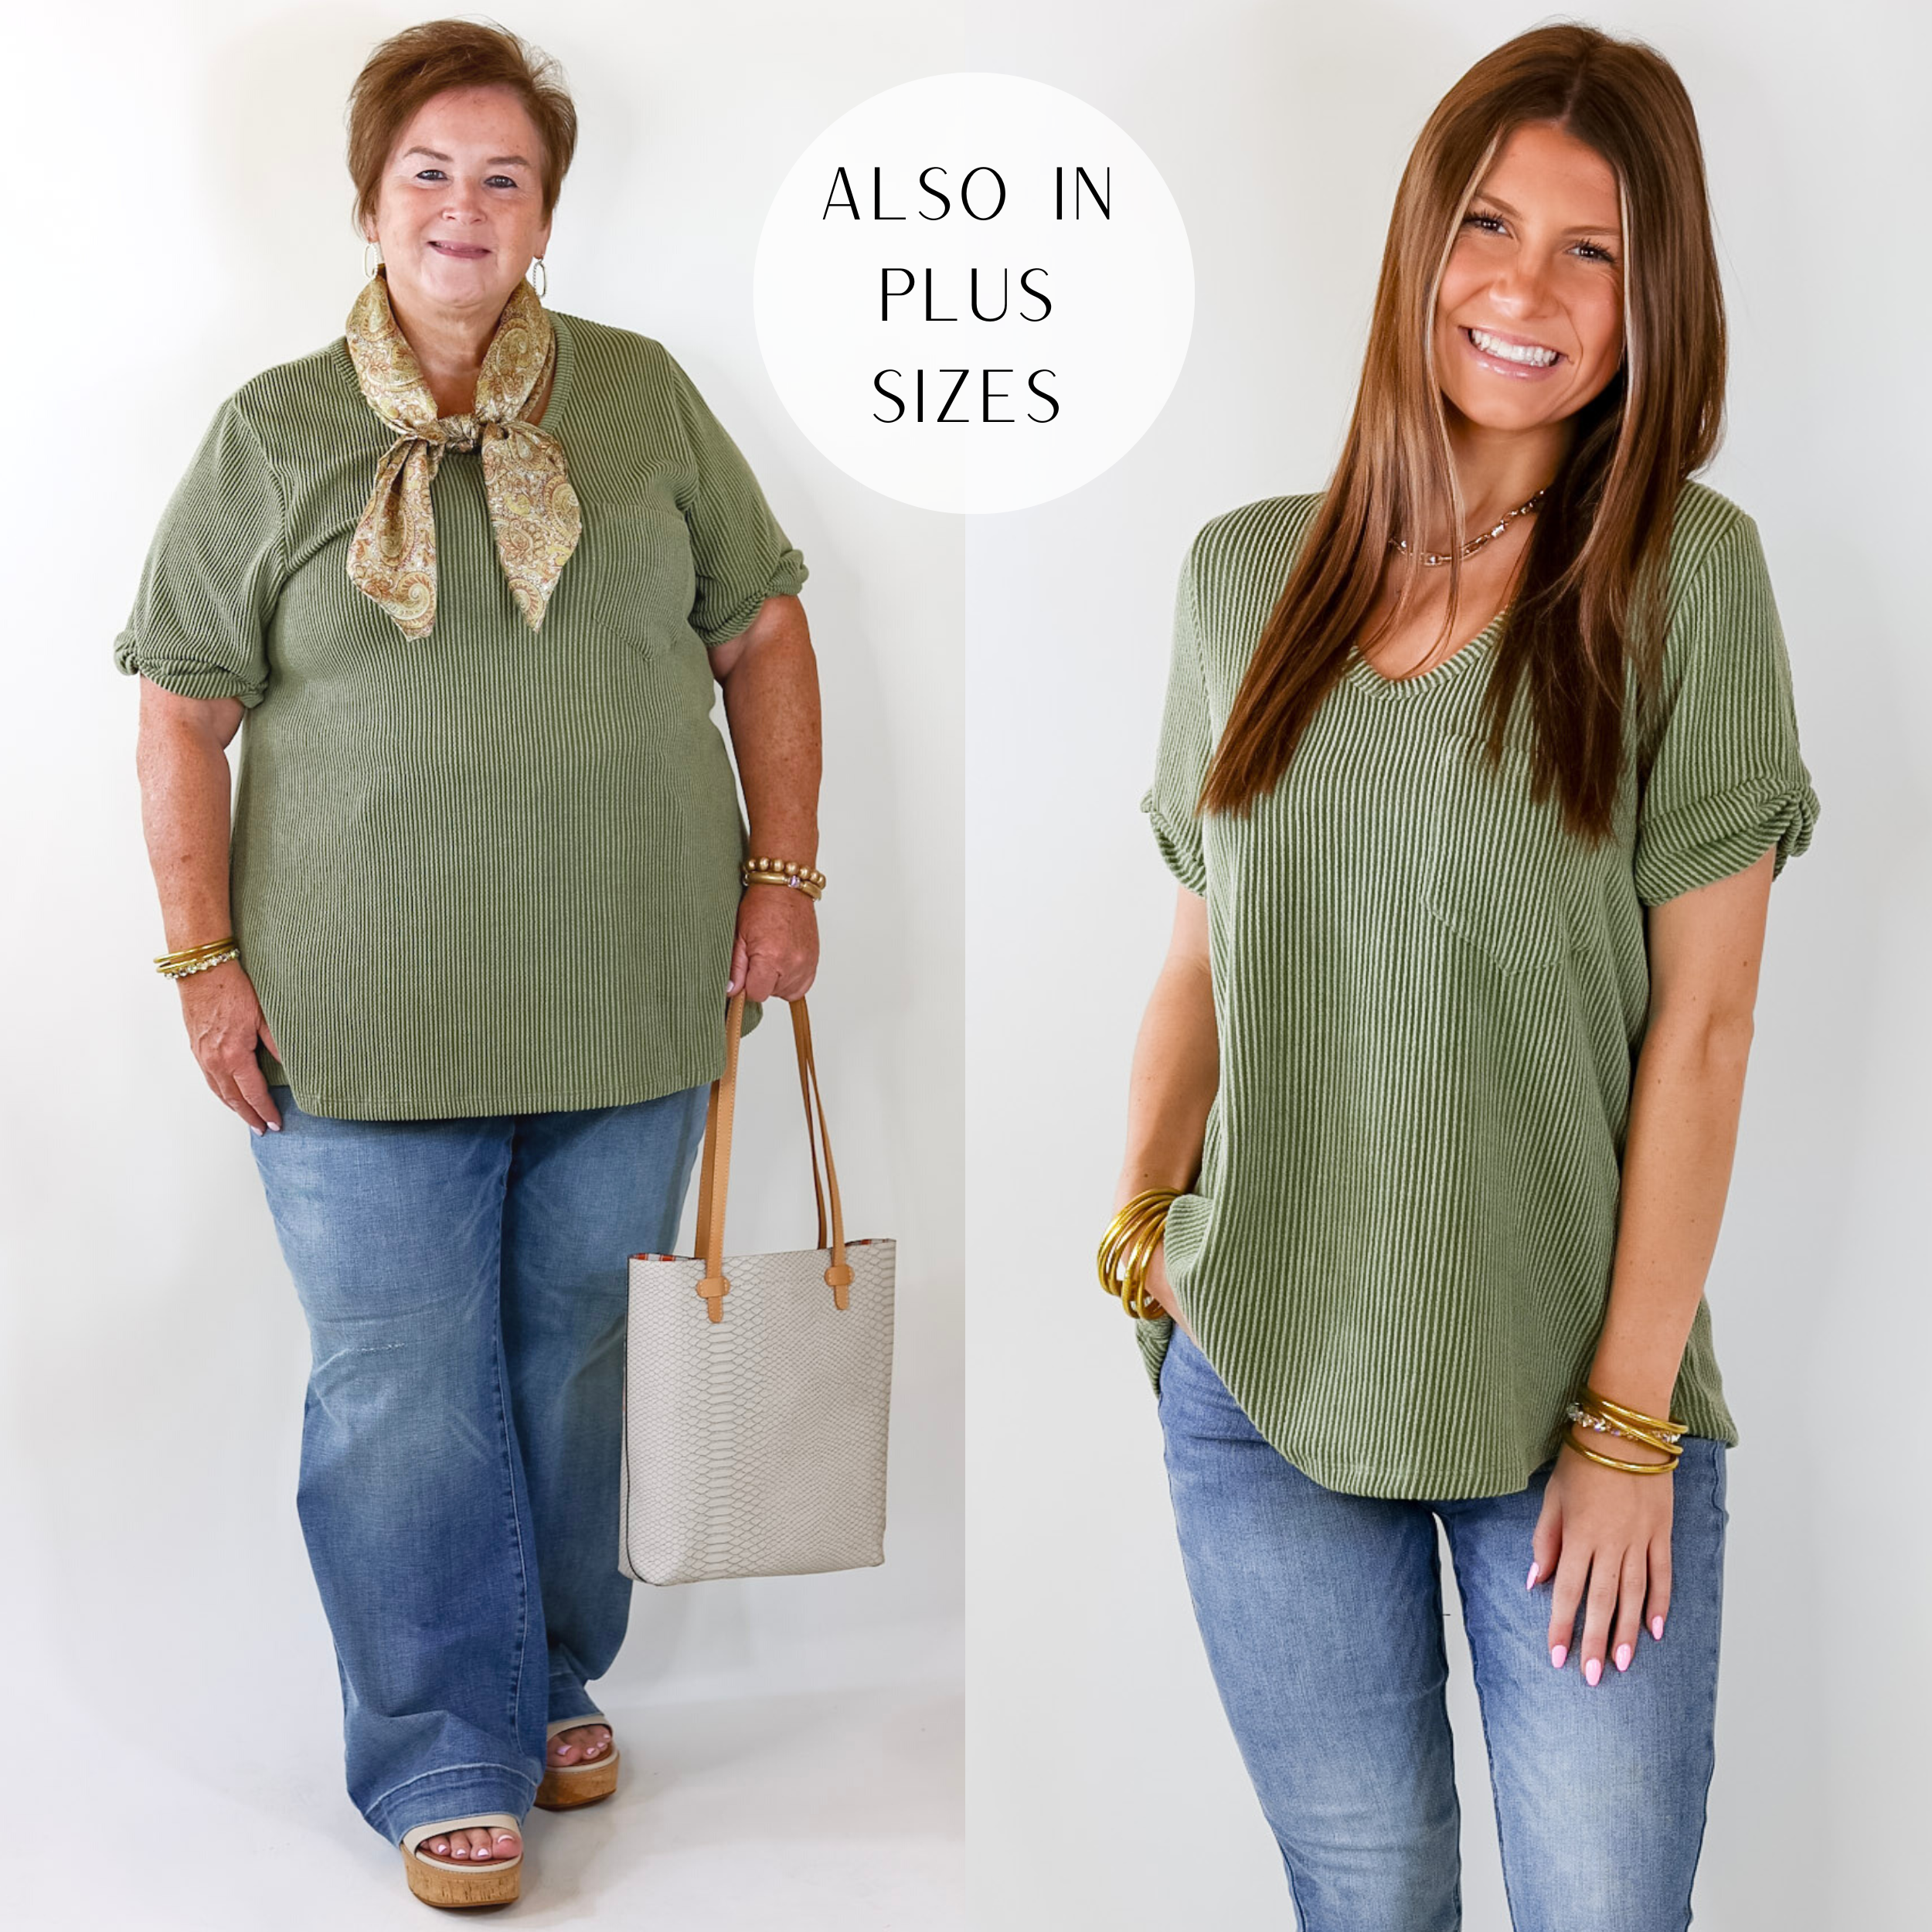 Model is wearing a ribbed short sleeve top in olive green. Model has this top paired with skinny jeans, tan wedges, and gold jewelry.